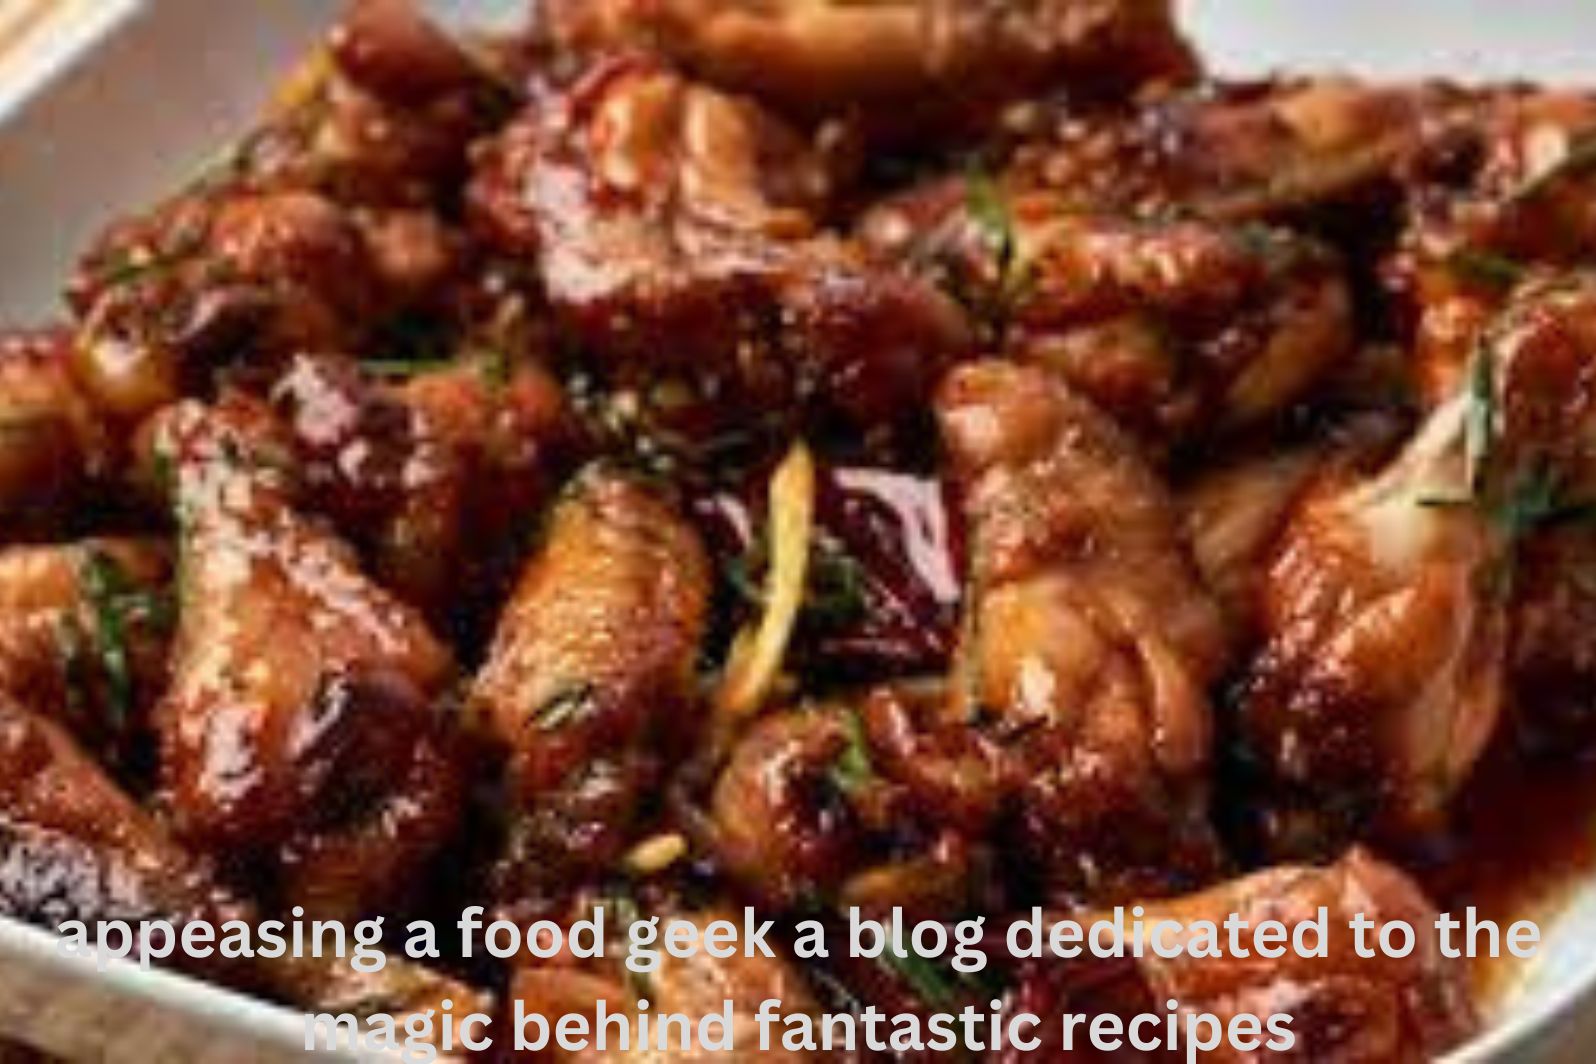 Appeasing a Food Geek a Blog Dedicated to the Magic Behind Fantastic Recipes